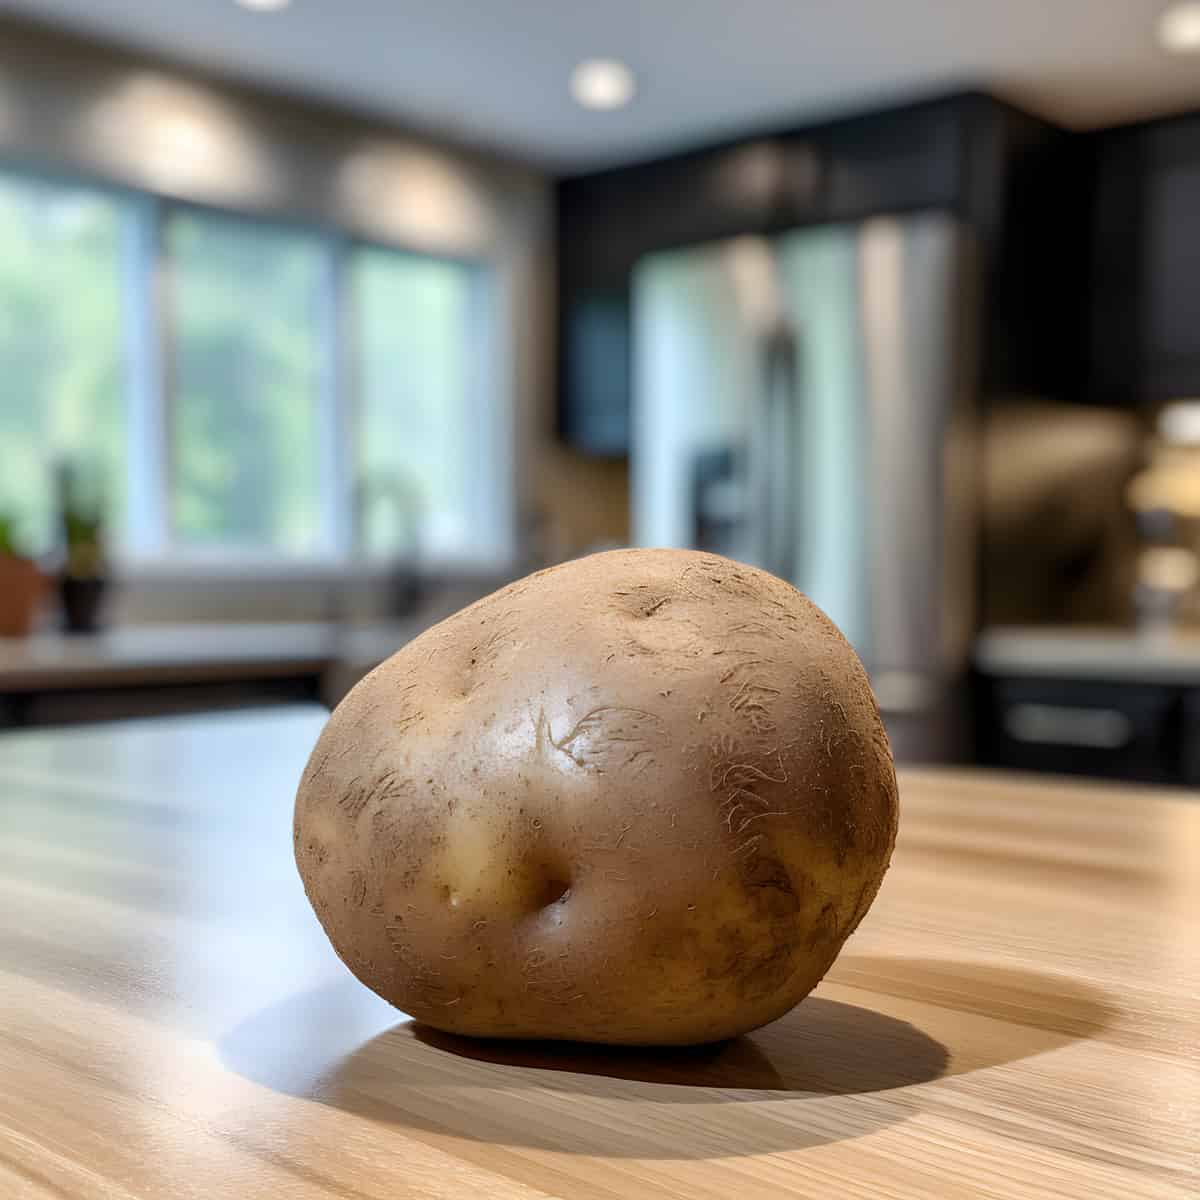 Puca Quitish Potatoes on a kitchen counter